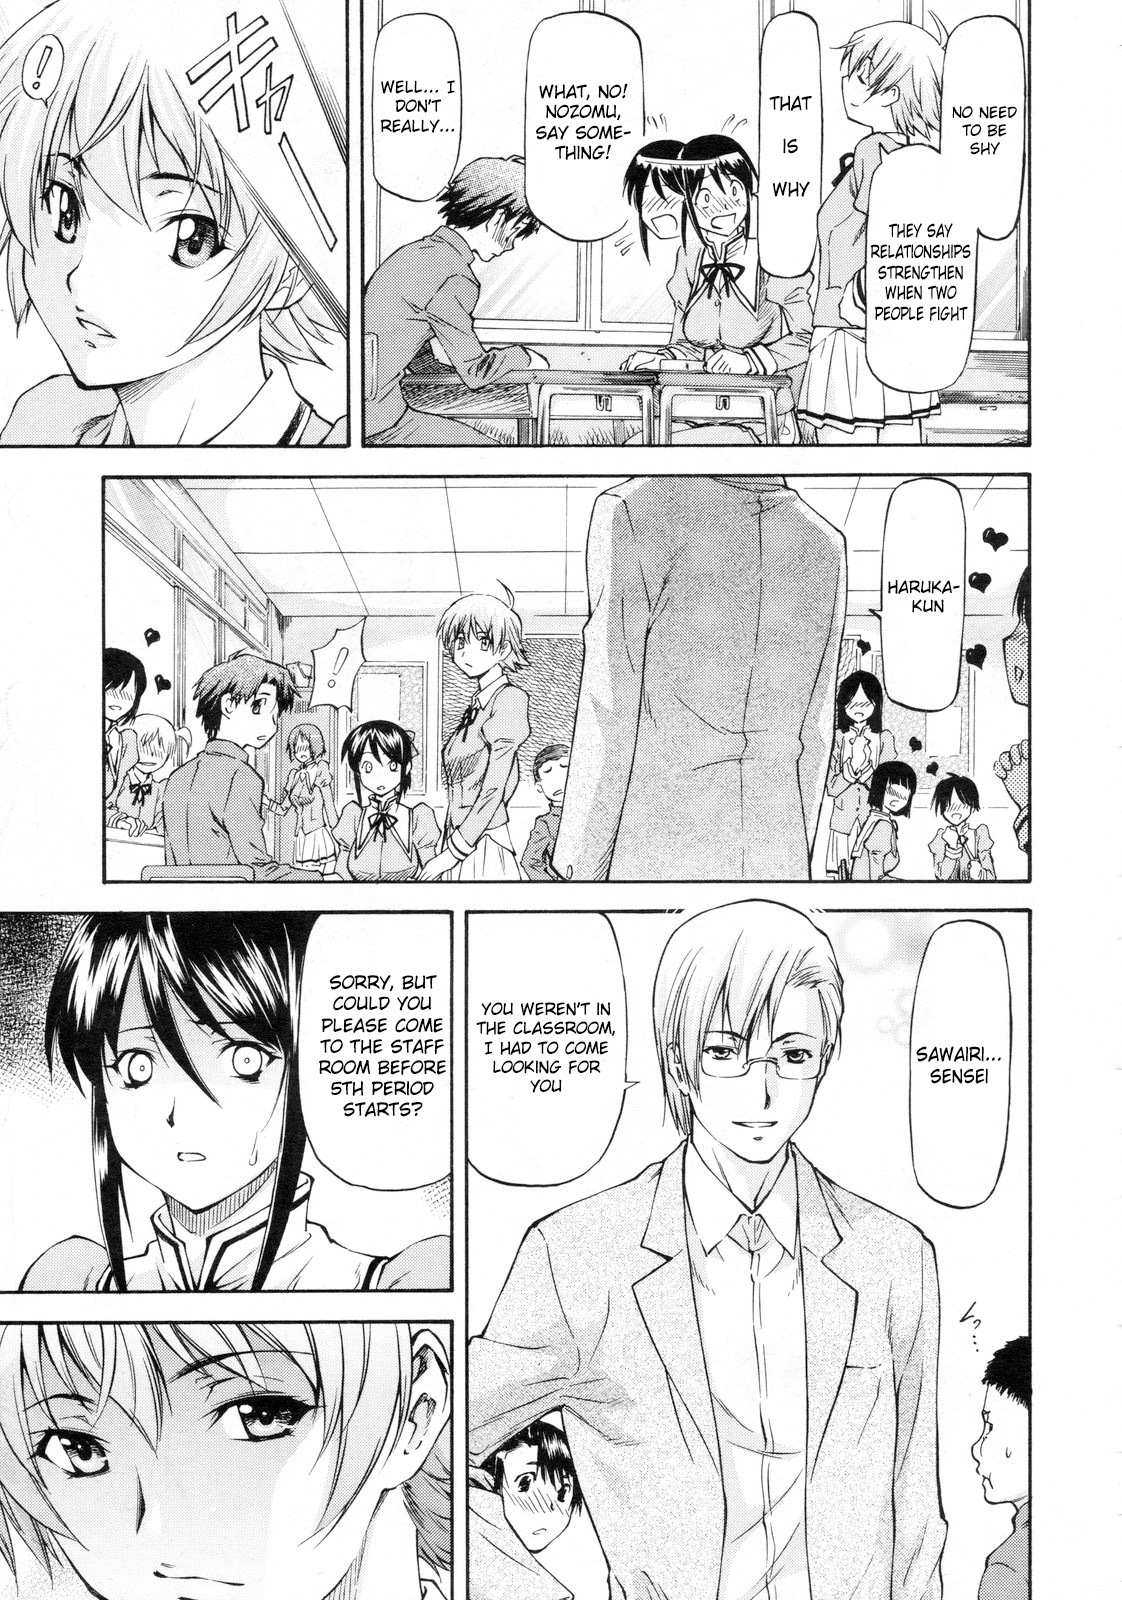 [Nagare Ippon] Confession From Beyond the Mirror [ENG][RyuuTama] 